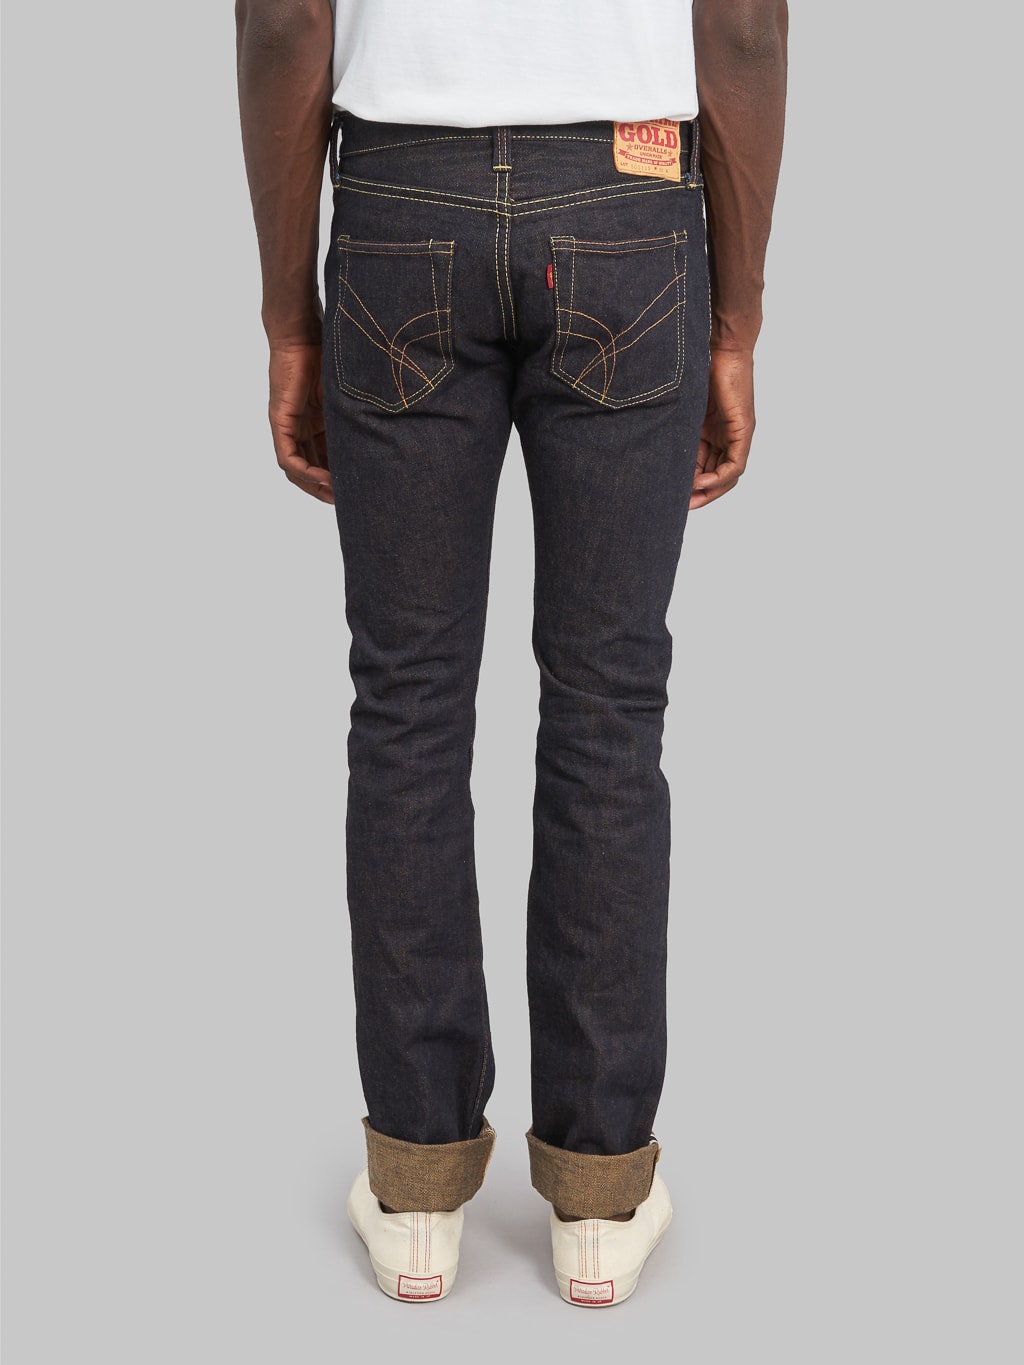 The Strike Gold Brown Weft Slim Tapered Jeans back rise